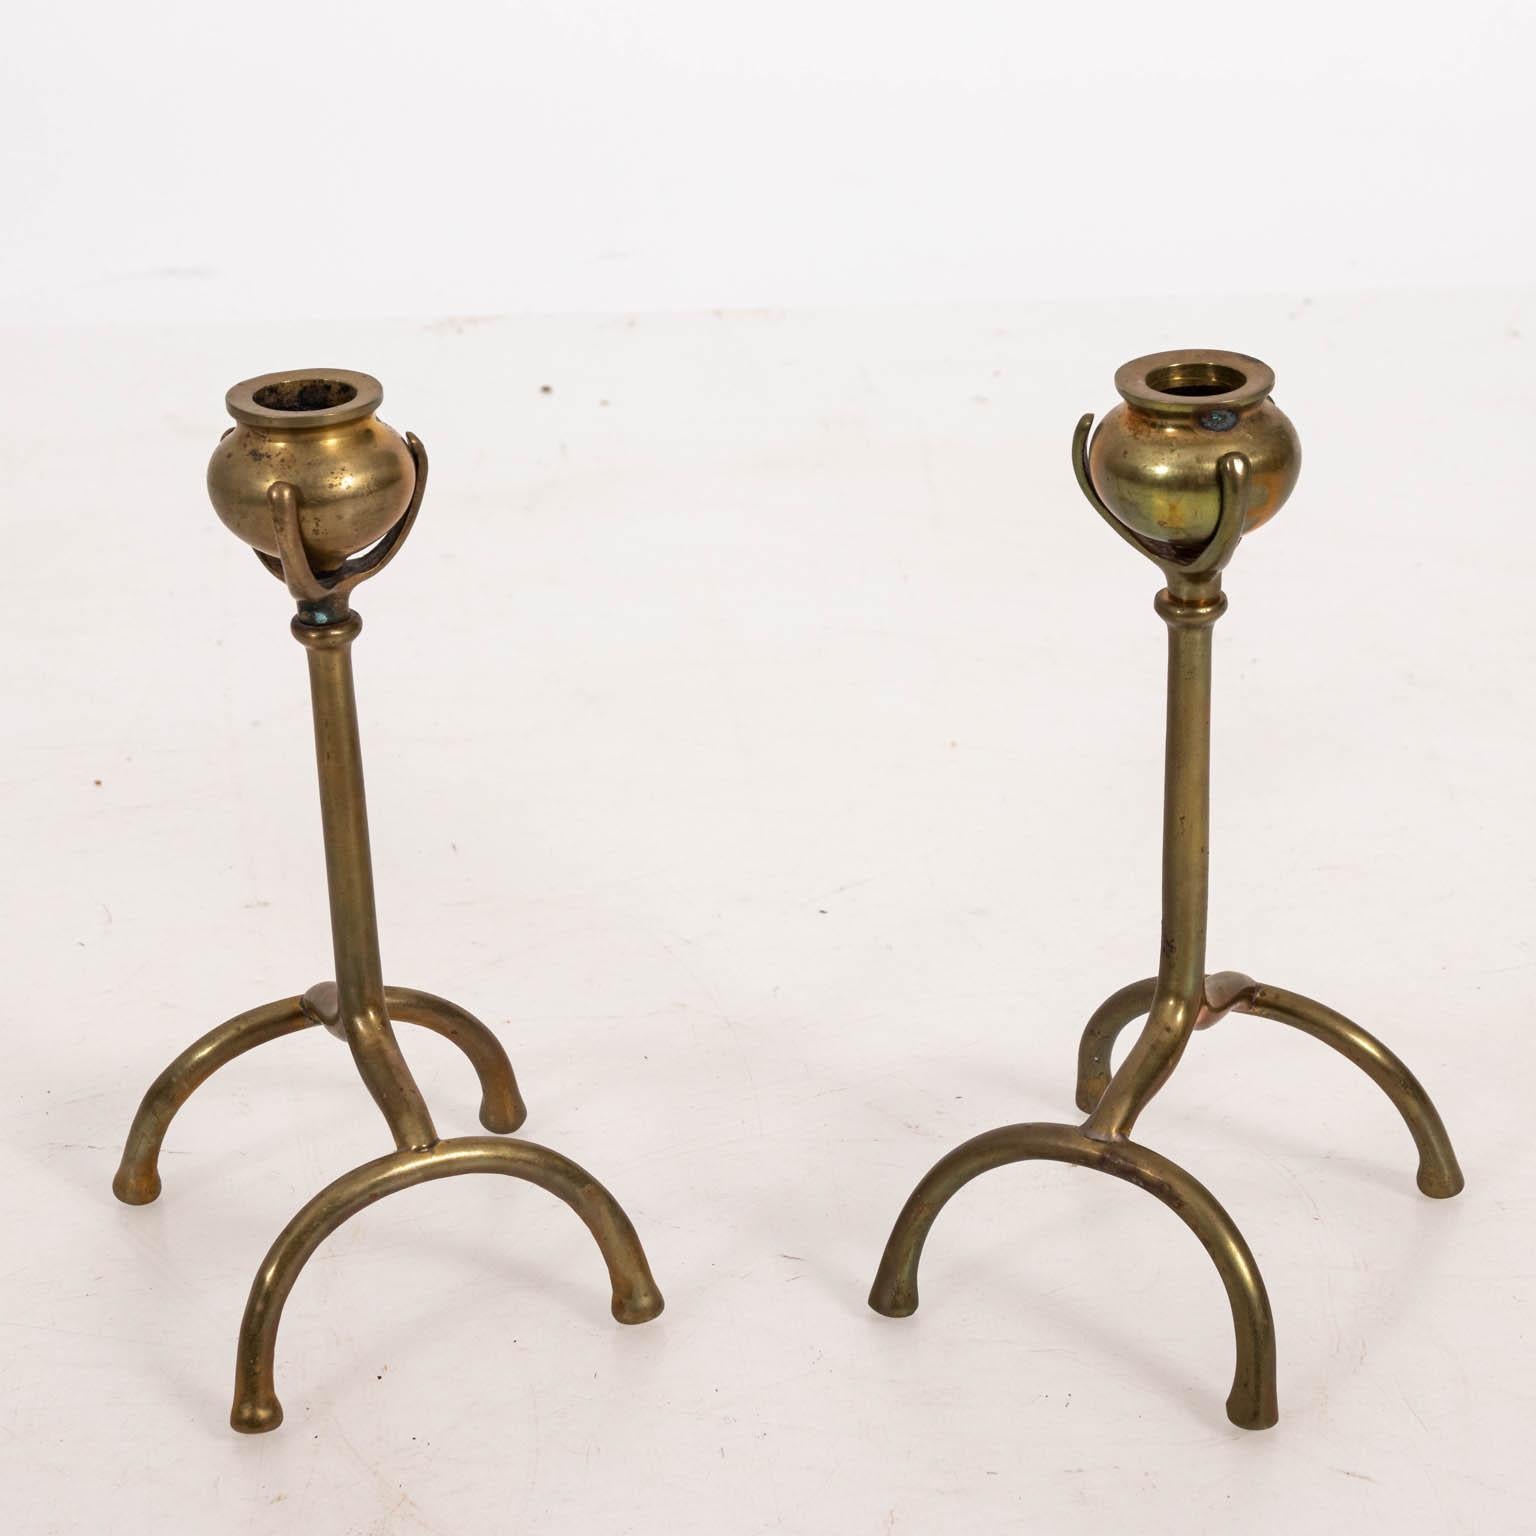 Aesthetic Movement Pair of Tiffany Style Brass Urn Shaped Candlesticks